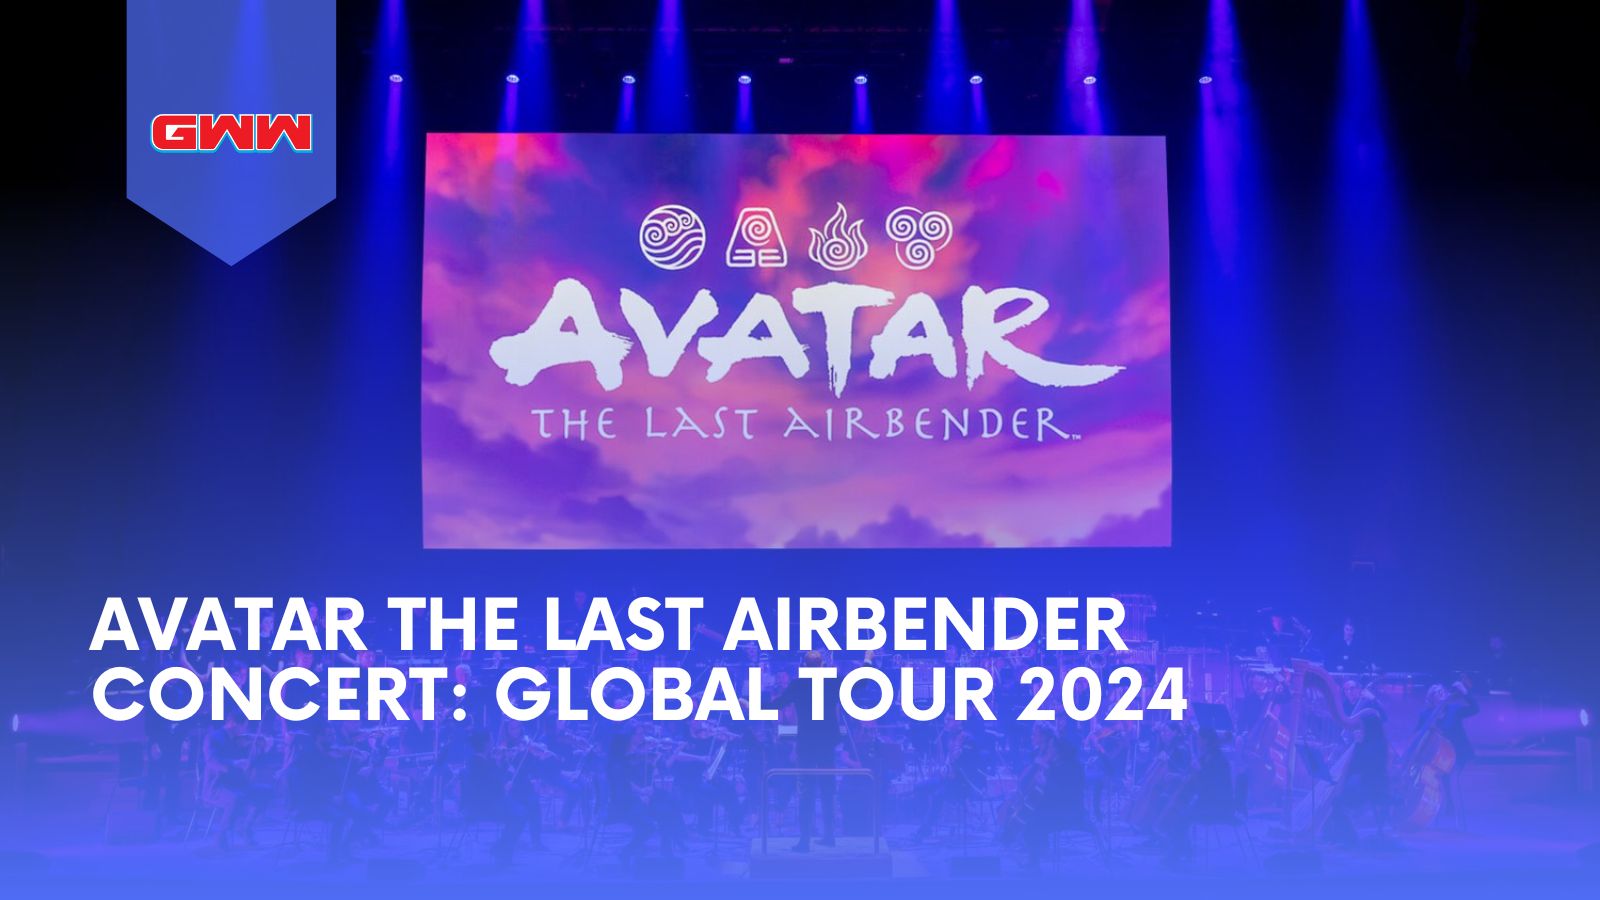 Avatar The Last Airbender Concert: Global Tour 2024